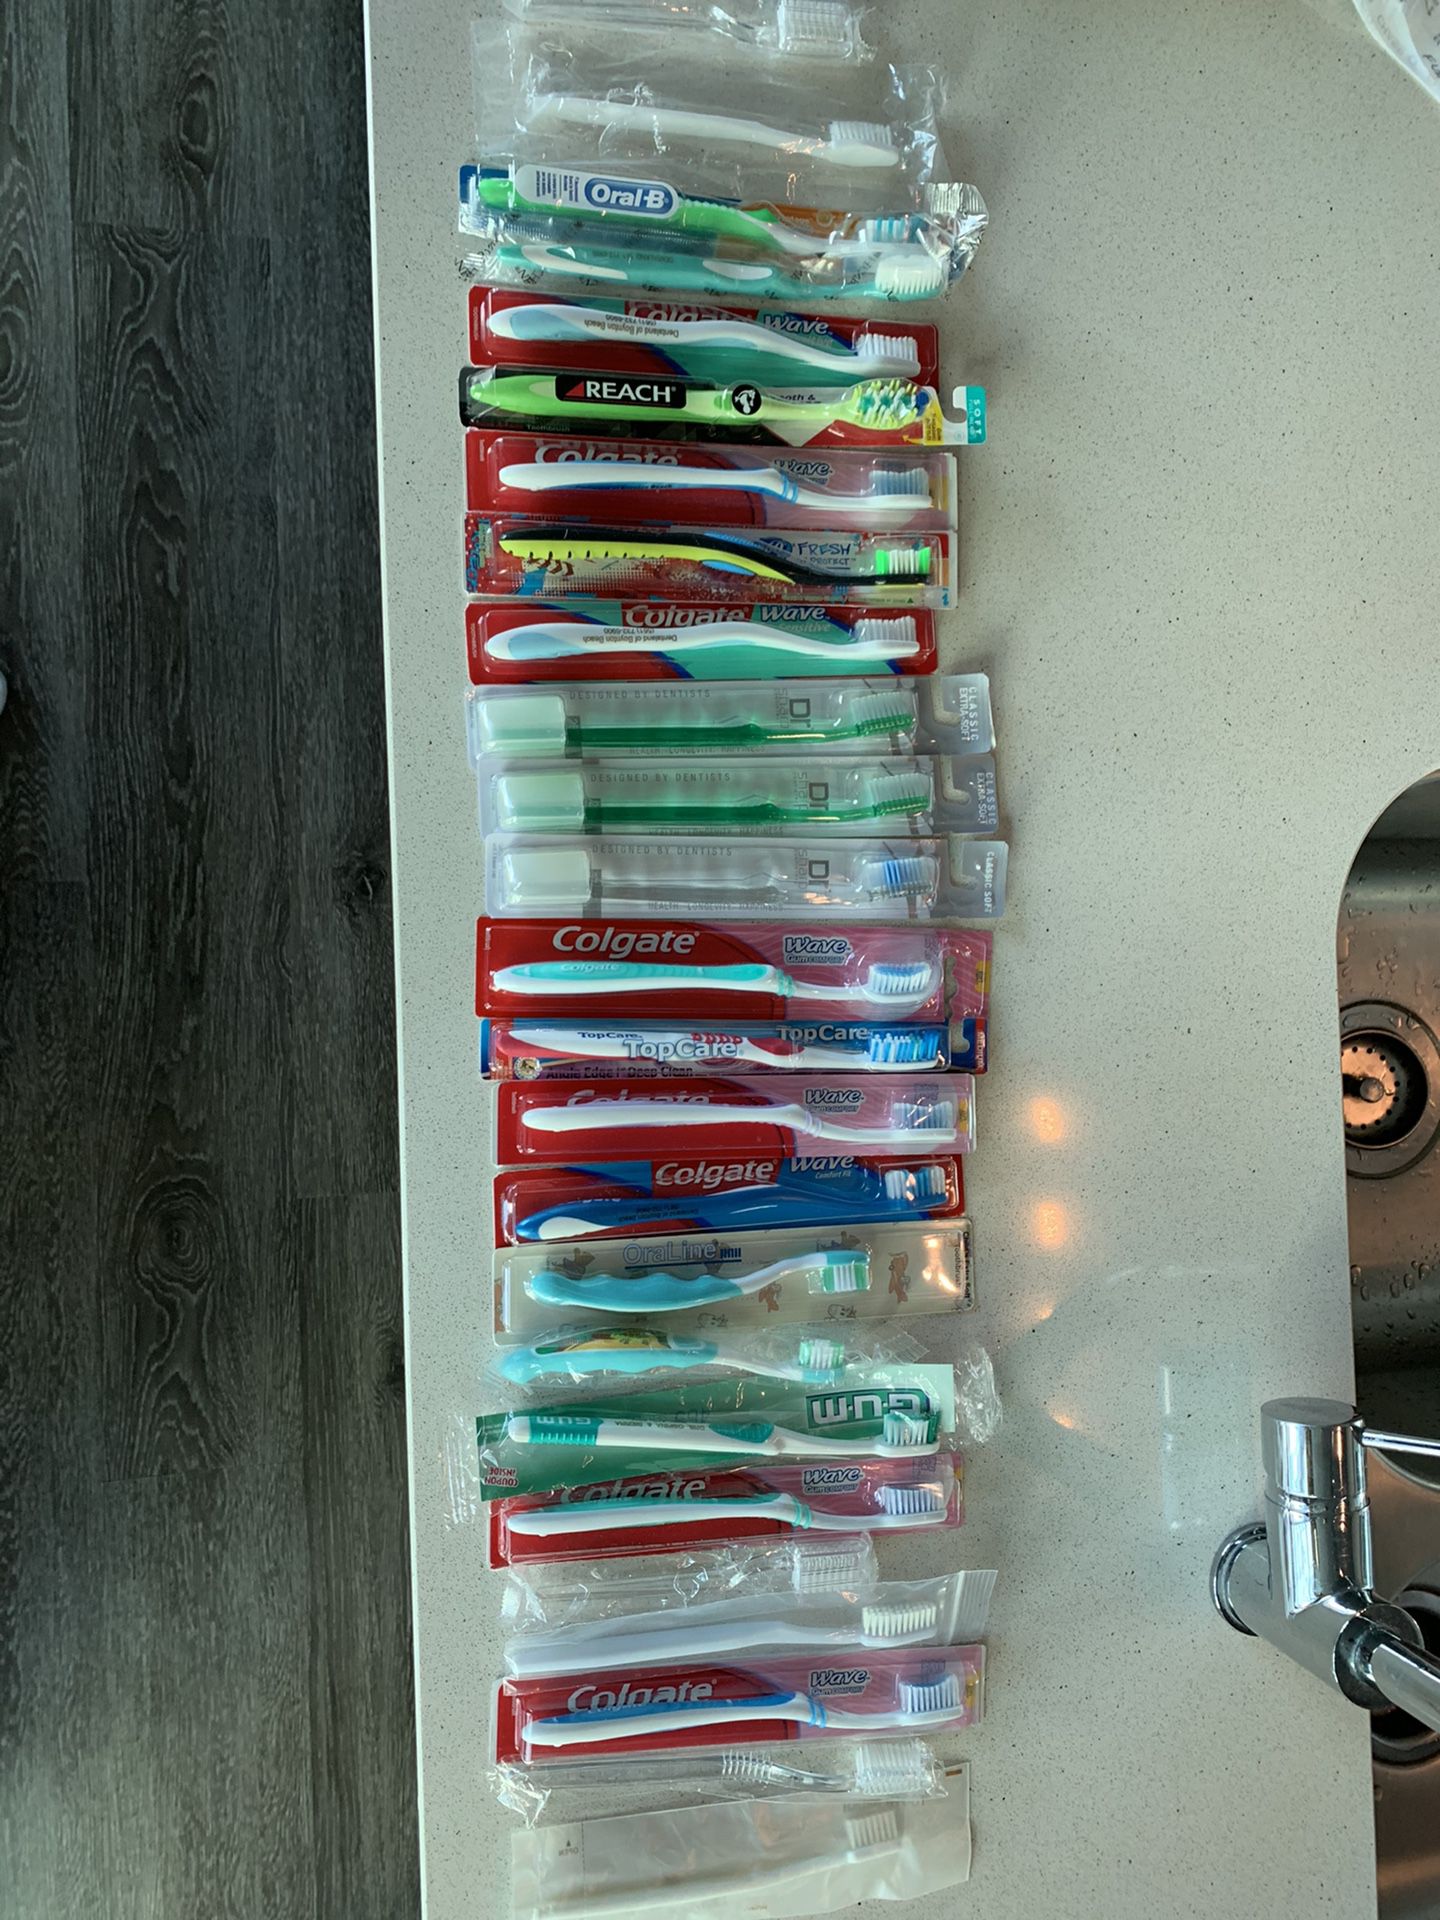 Dental Supplies (brand new toothbrushes, Dental Floss & Picks) - Pick Up From Brickell (33131)